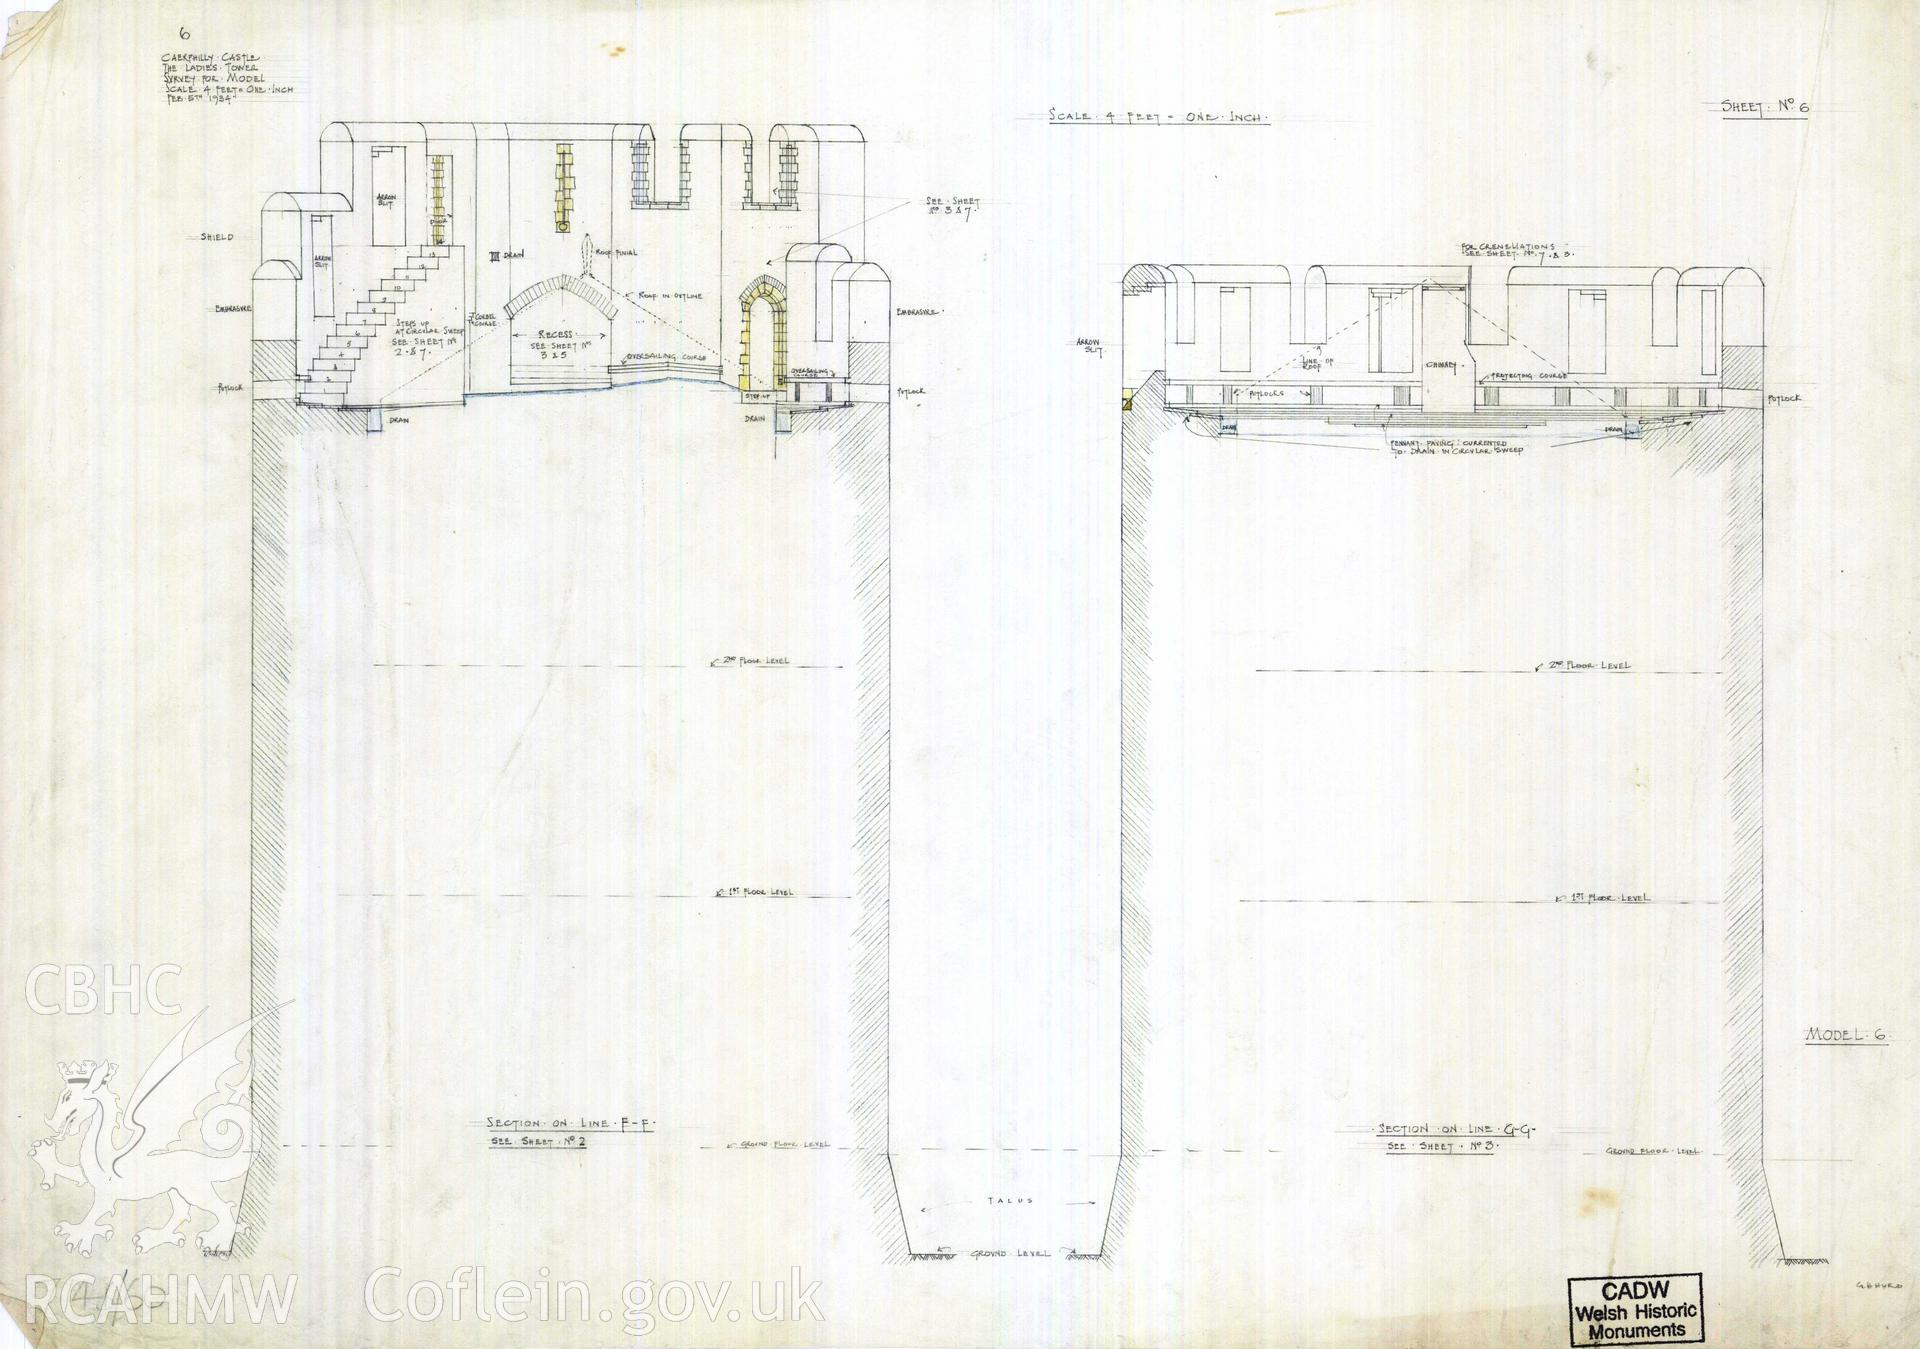 Cadw guardianship monument drawing of Caerphilly Castle. NW tower, 6, sections. Cadw ref. no: 714B/60. Scale 1:48. Digital copy on Cadw CD C1. Original drawing withdrawn and returned to Cadw at their request.